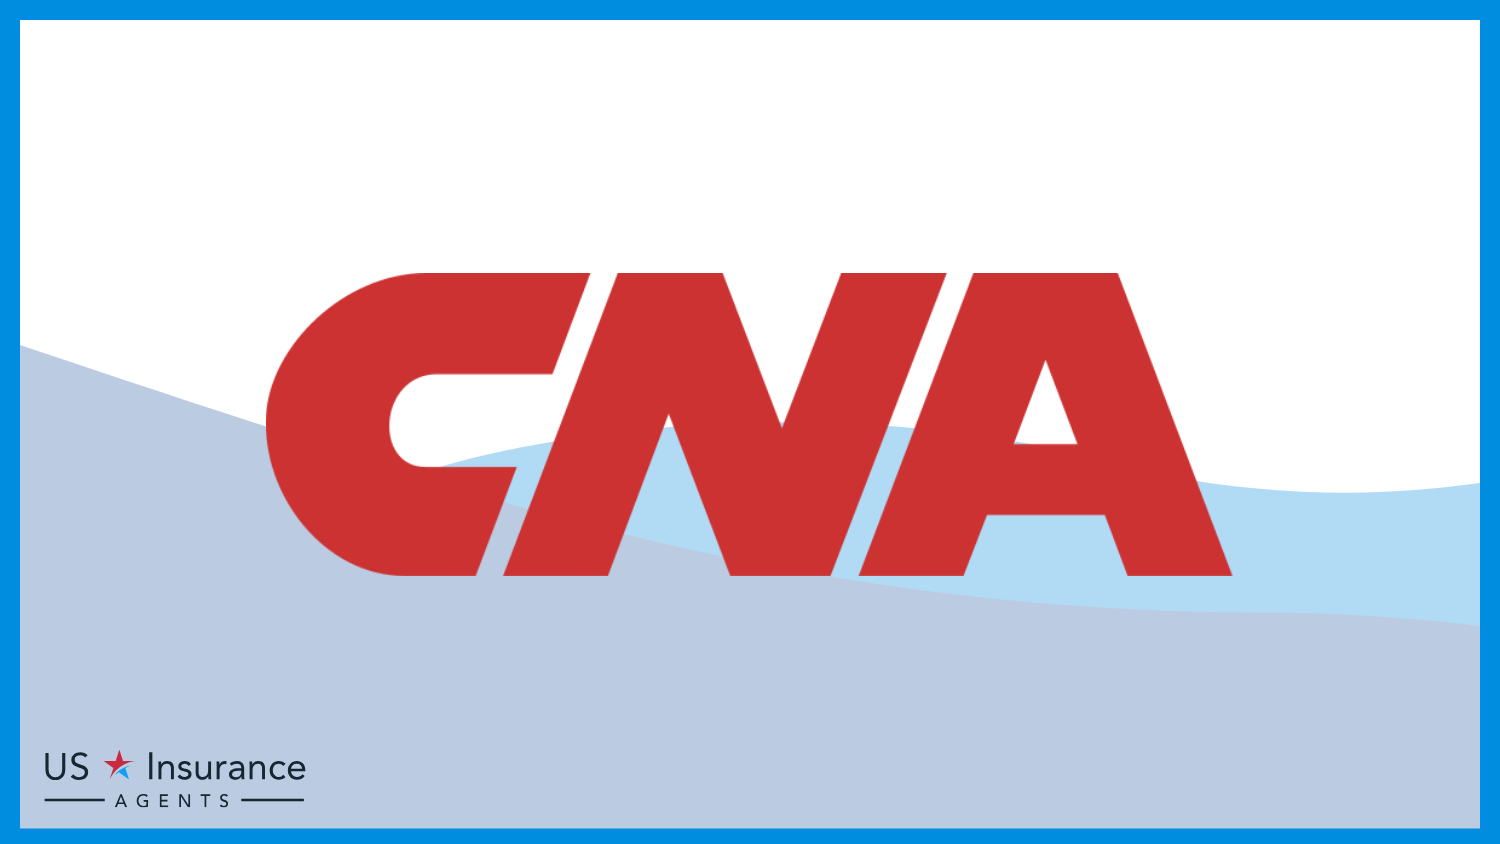 CNA: Best Business Insurance for Yoga and Pilates Instructors 